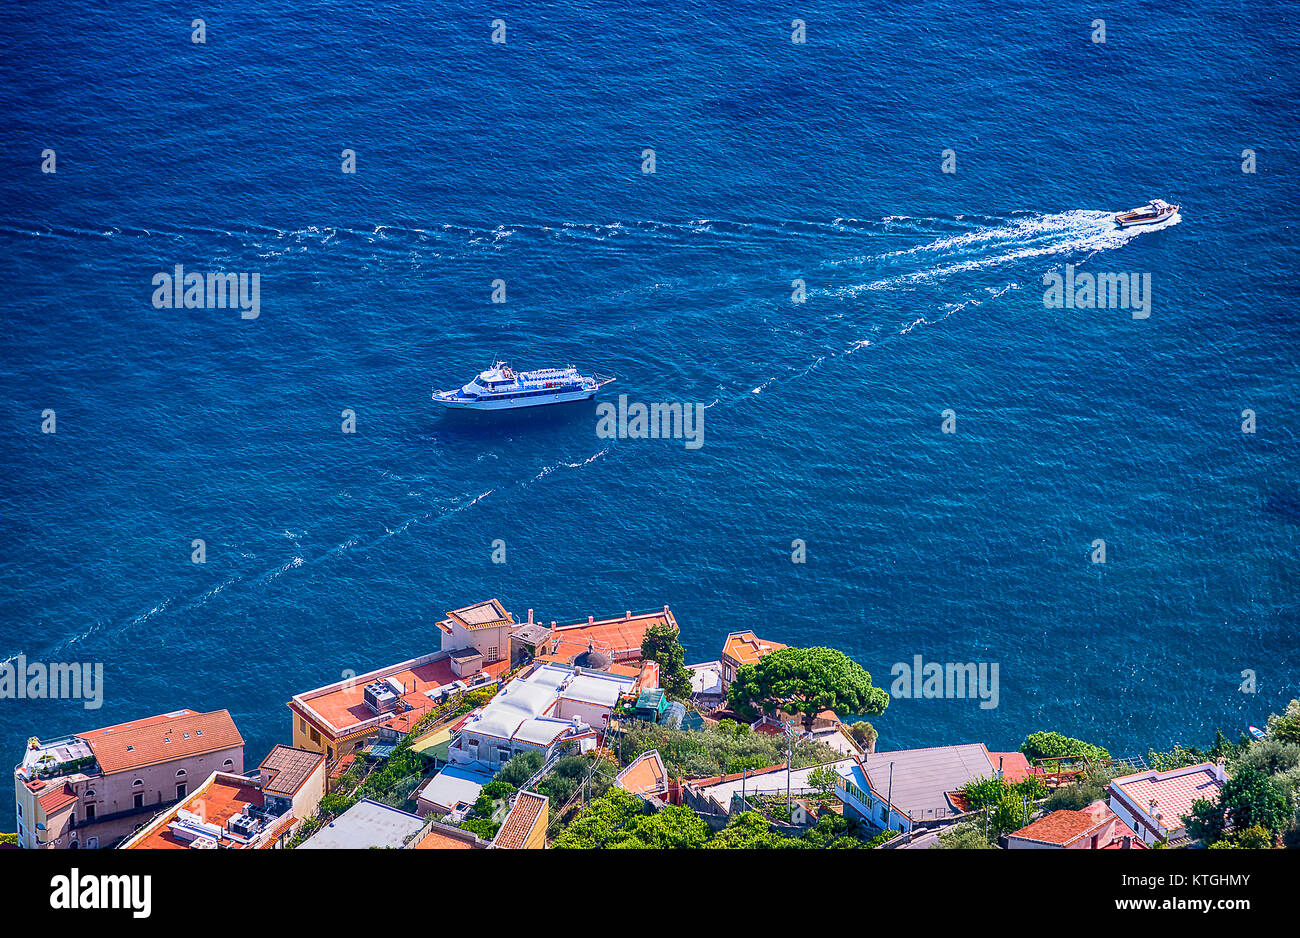 Scenic view of Amalfi coast from a height Stock Photo